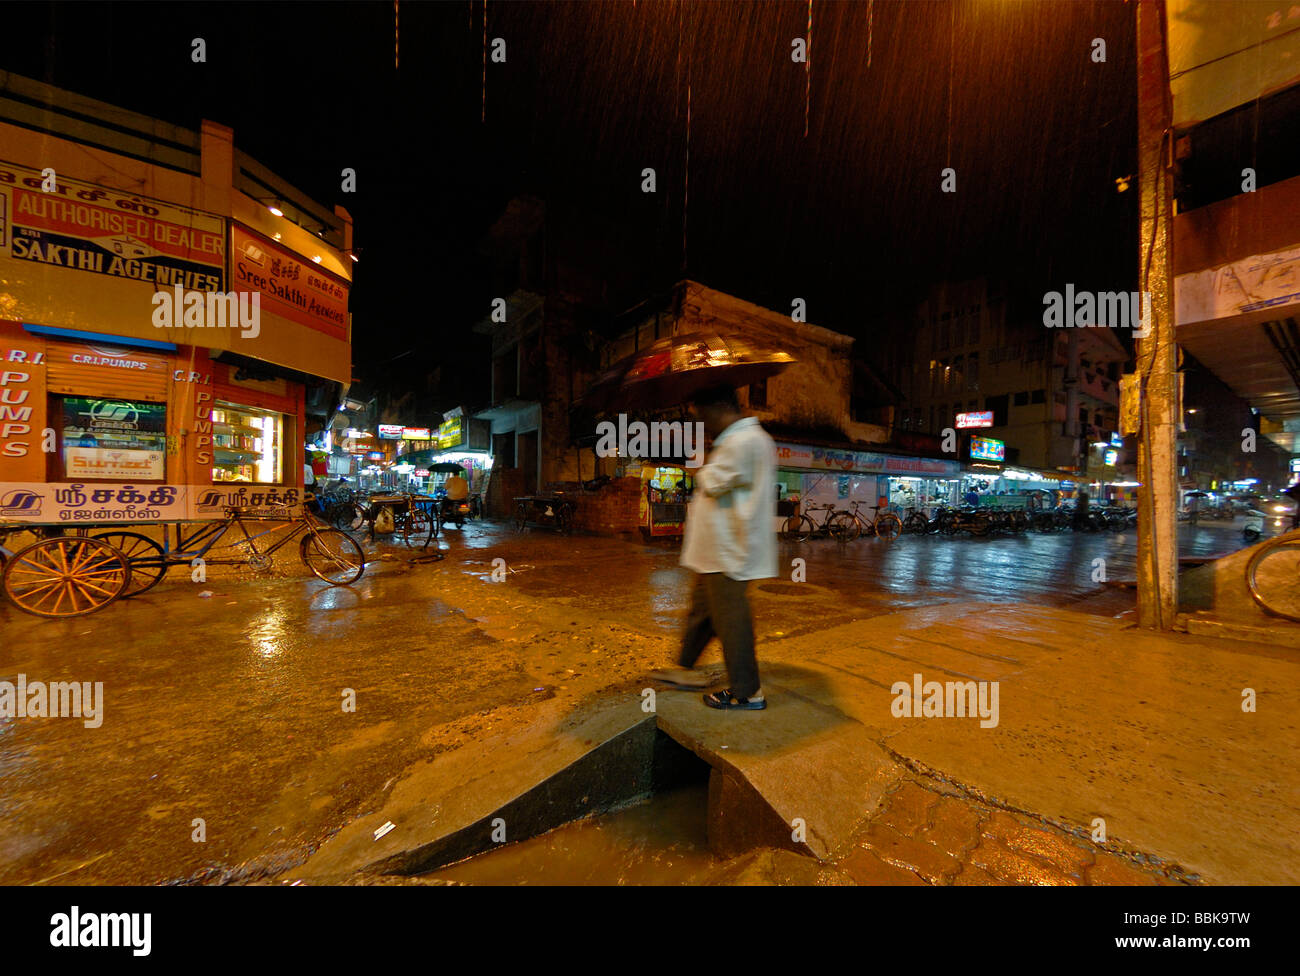 Indian man with umbrella crossing a road during heavy rain at nighttime in Pondicherry. India, Tamil Nadu, Pondicherry. Stock Photo